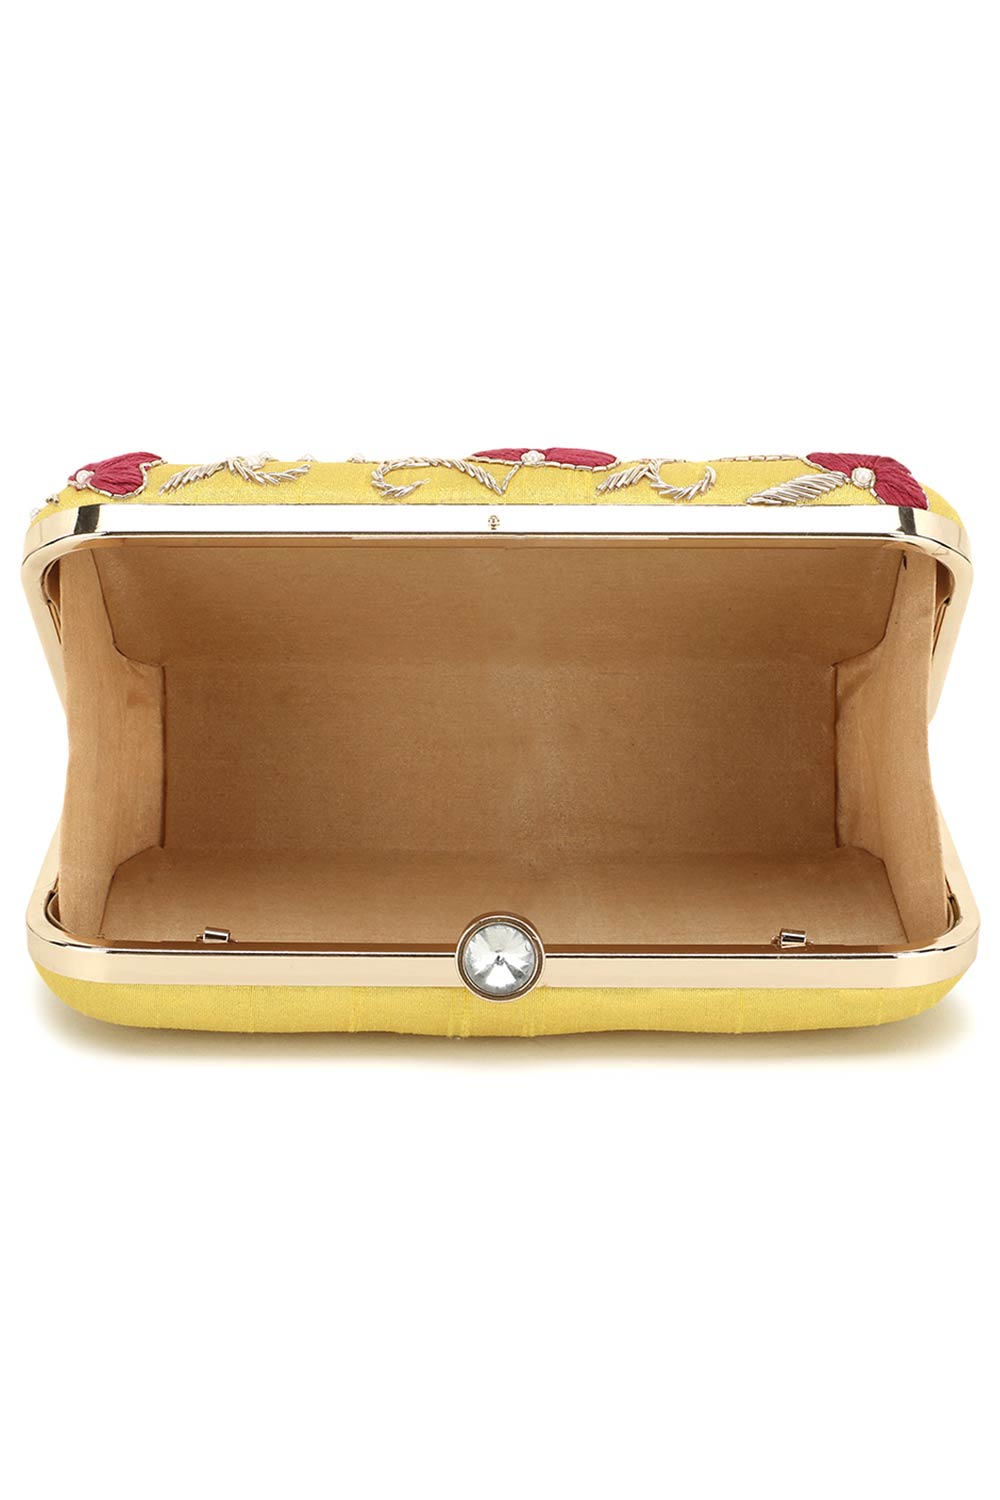 Designer Yellow Silk Clutch With Orange & Red Embroidery and Tassels